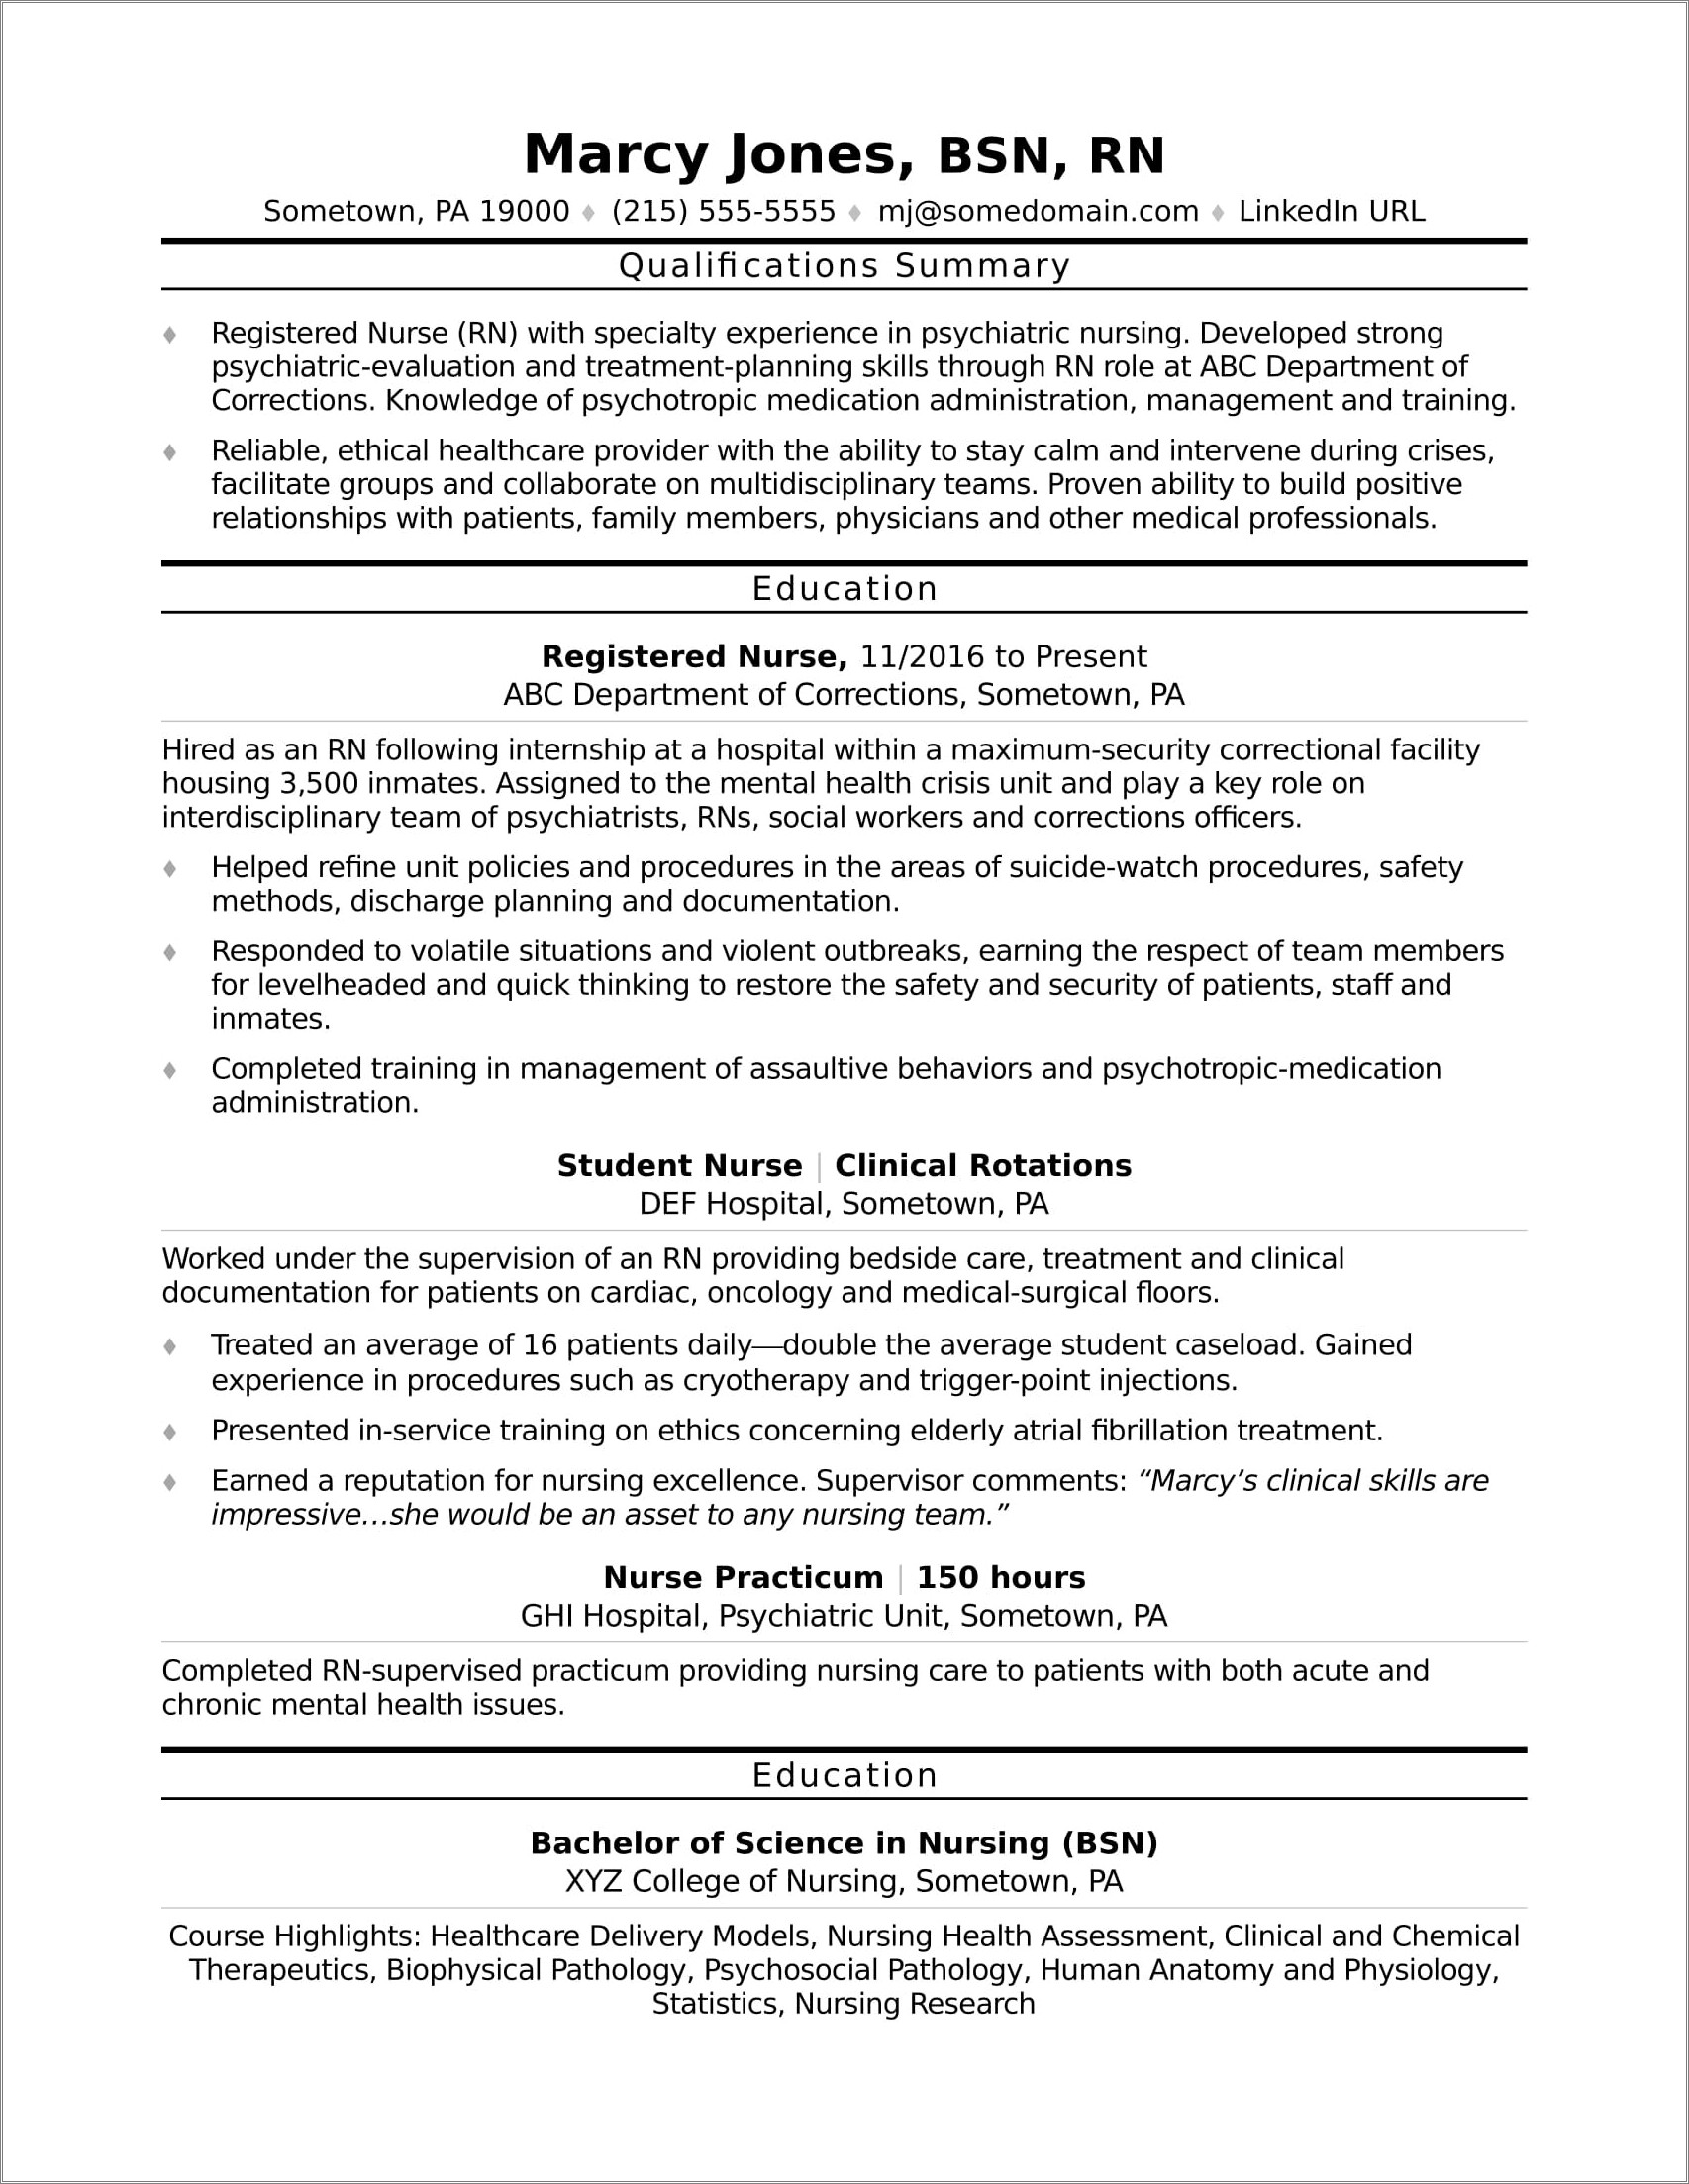 Objective Statement For New Nurse Resume